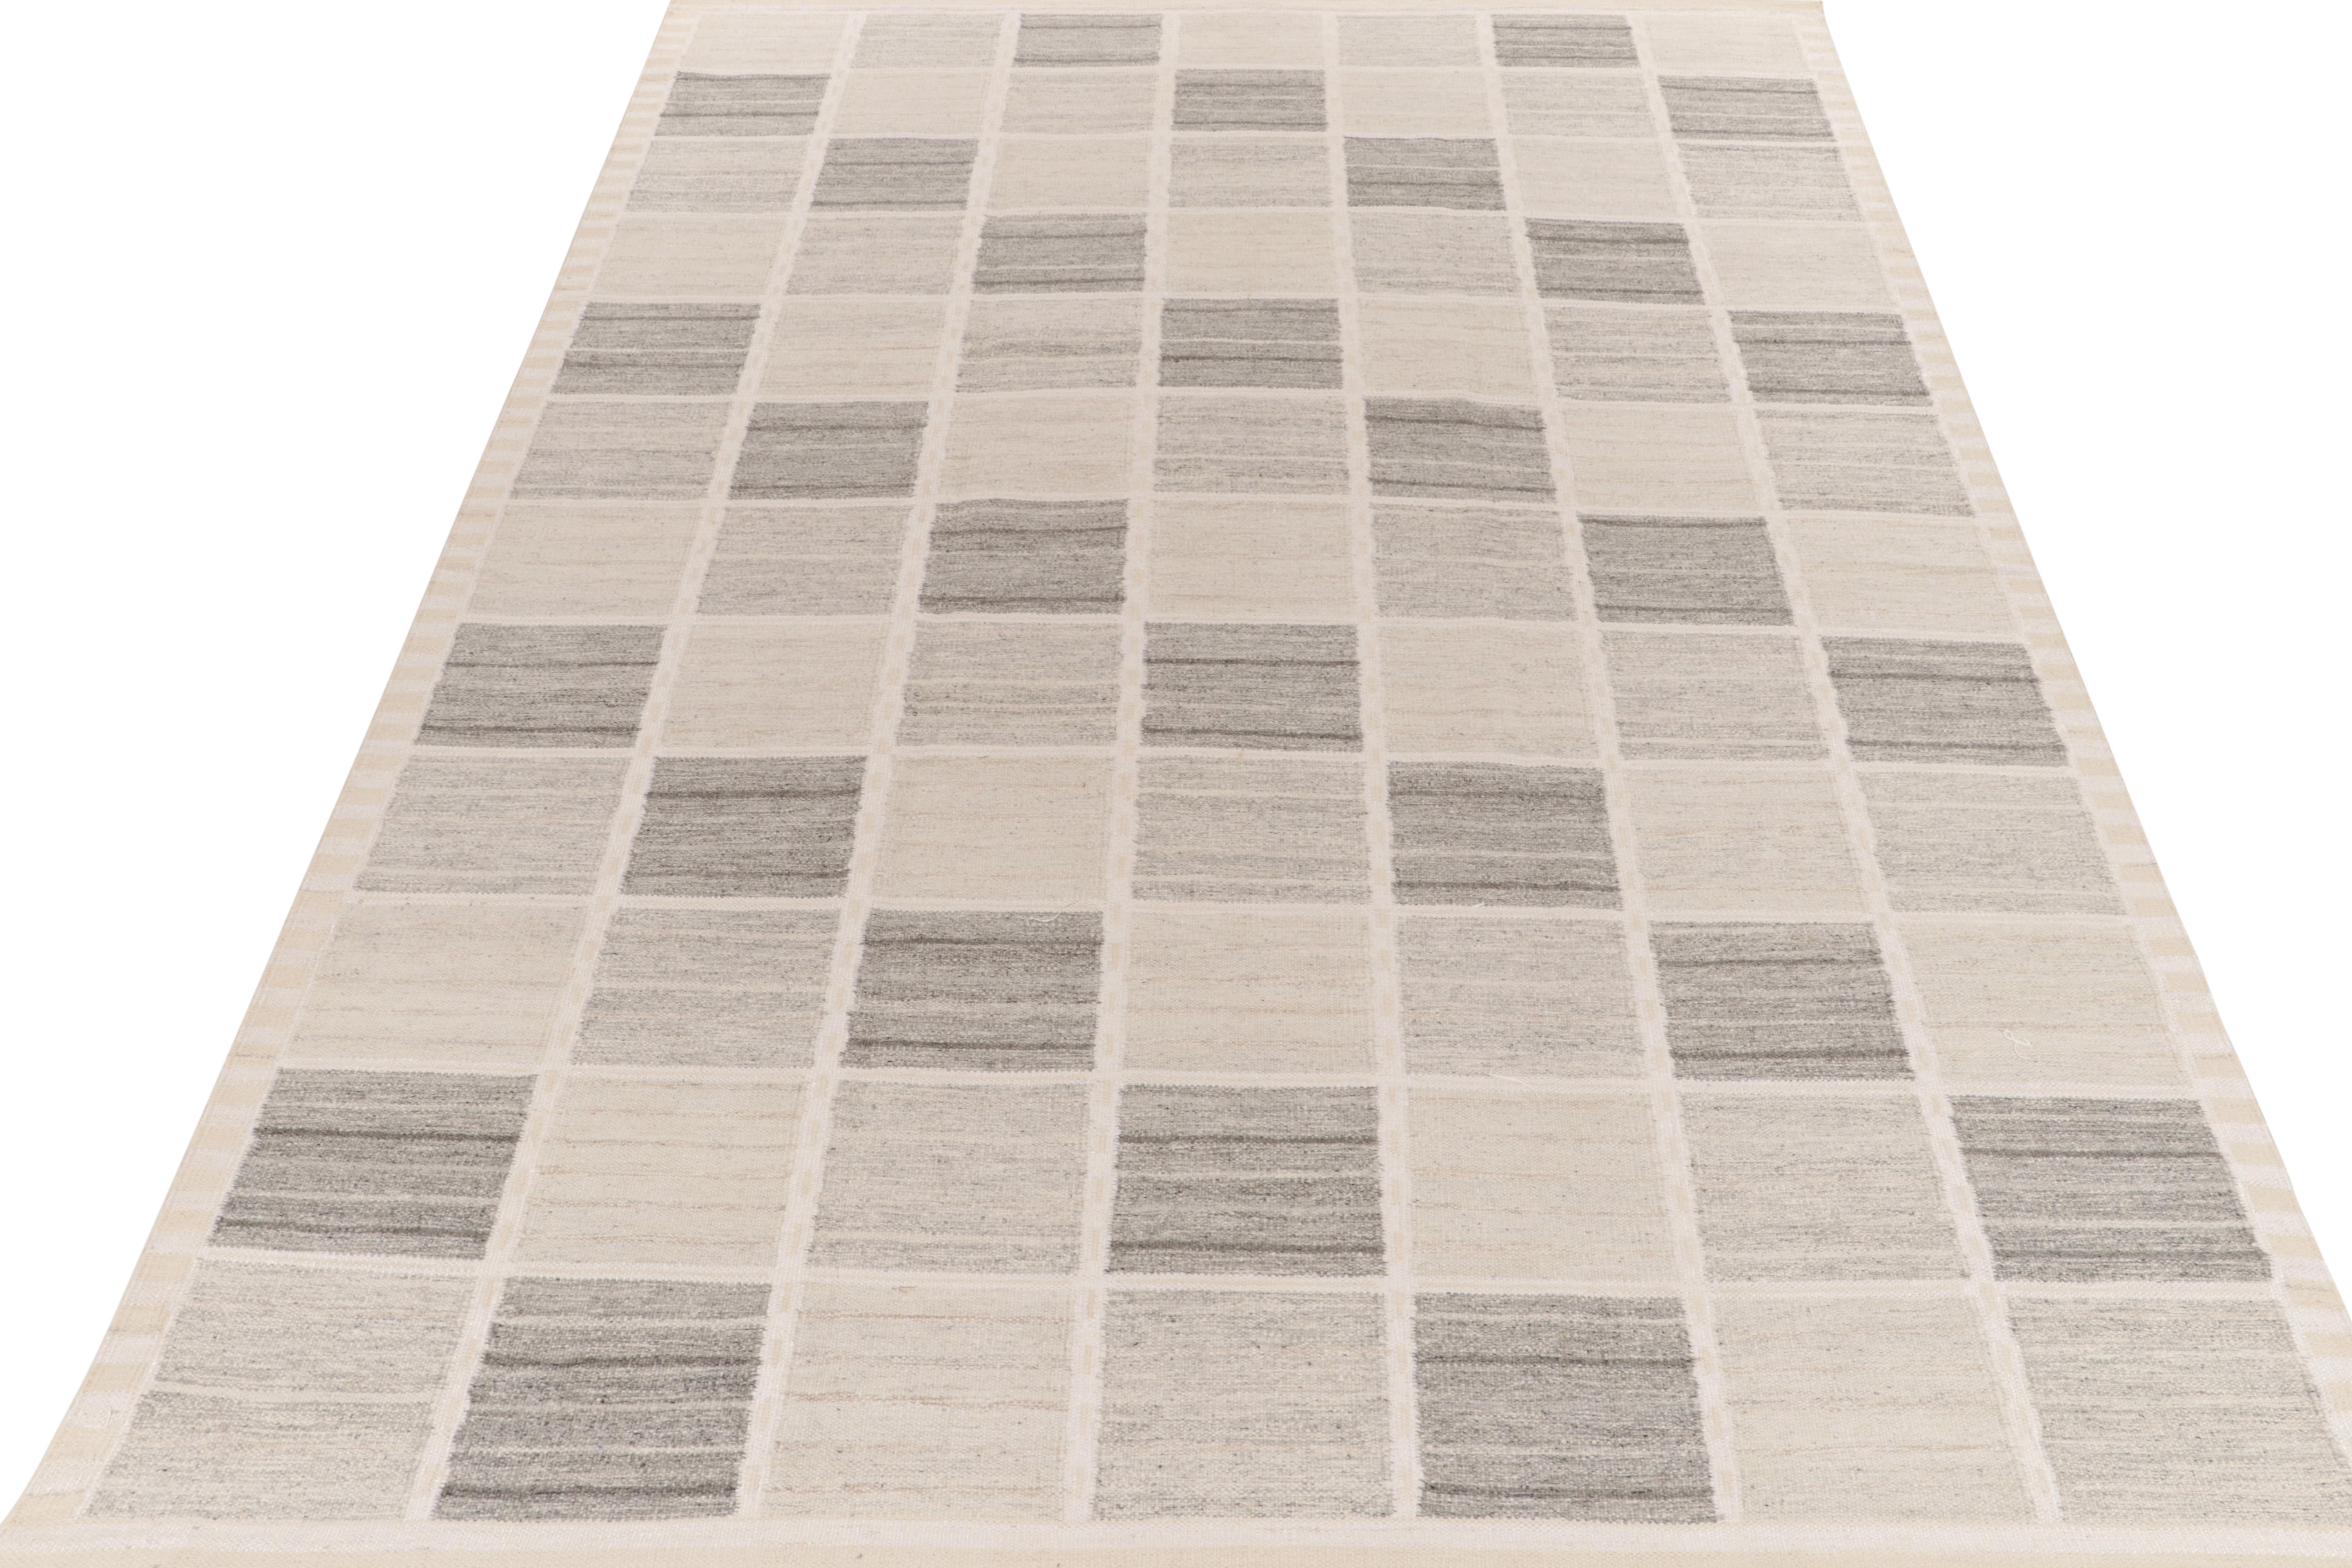 Exemplifying a modern take on Swedish Deco styles, a 10x14 flat weave from Rug & Kilim’s award-winning Scandinavian Kilim collection. The handwoven rug enjoys a smart application of geometry with well defined compartmentalisation entwining gray,